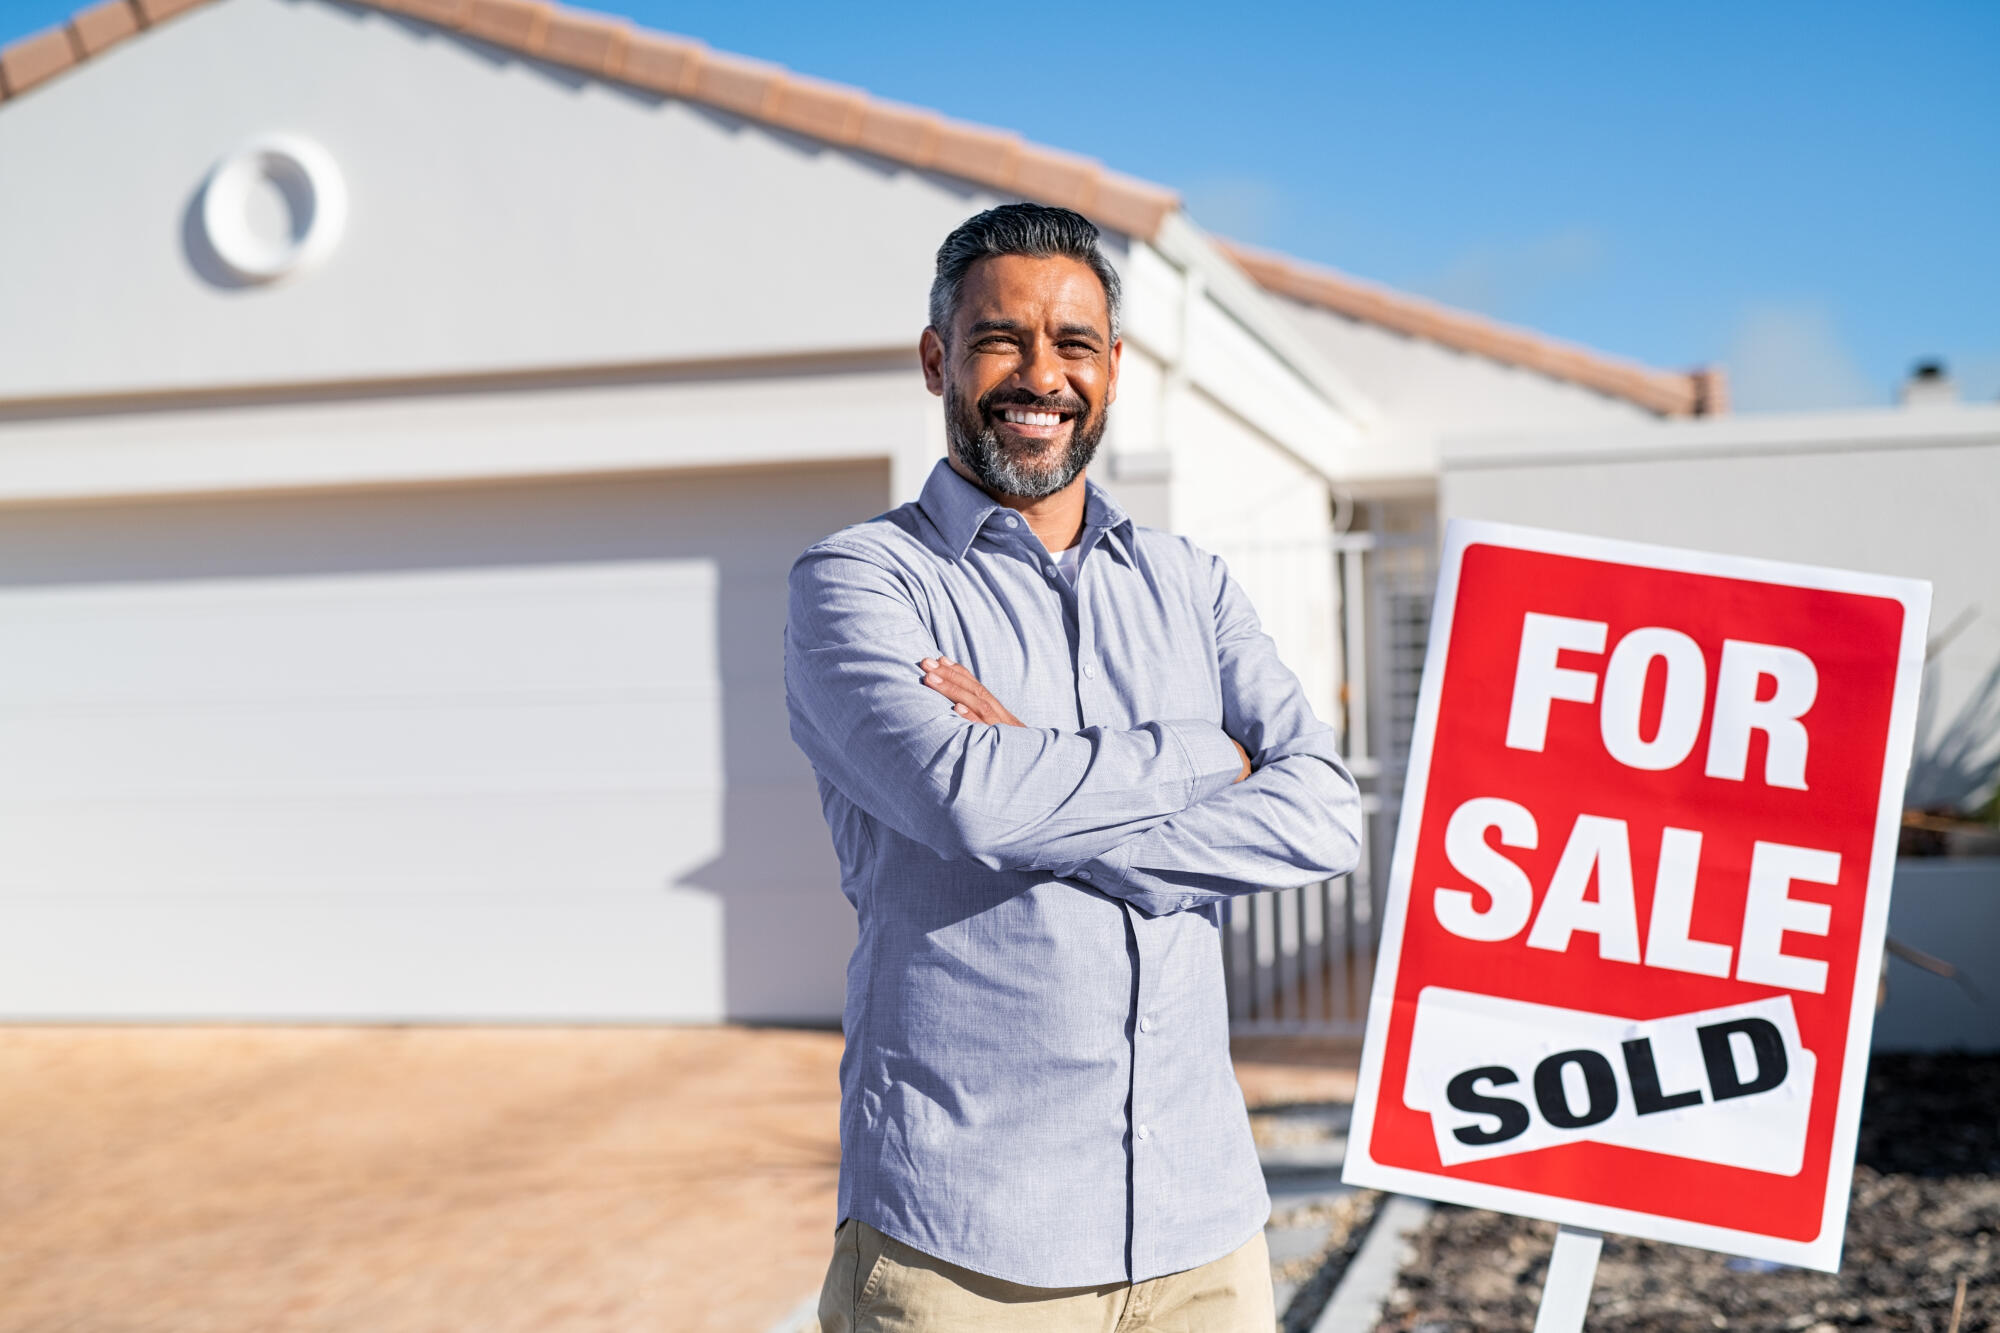 How to Get Someone to Buy My House: Top Tactics Revealed